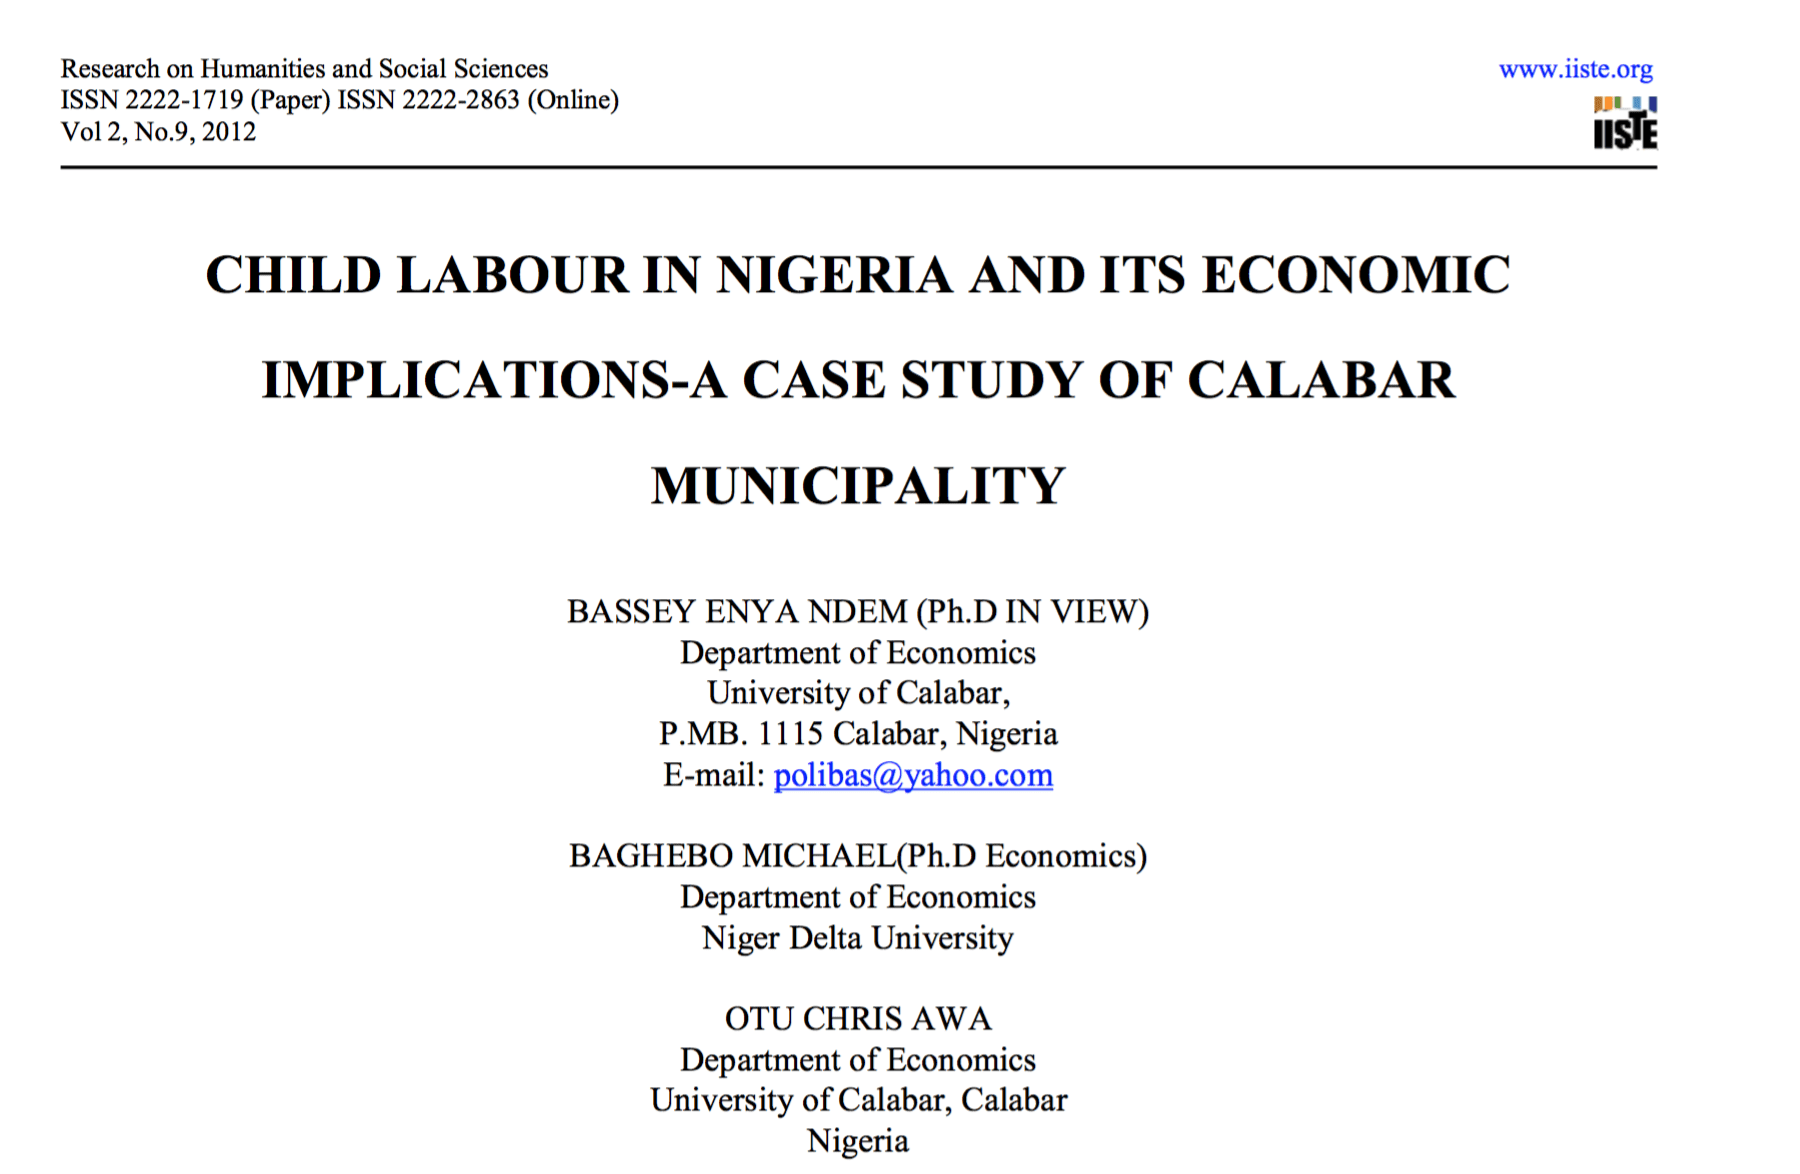 Child labour in Nigeia and its economic implications – a case study of Calabar municipality.